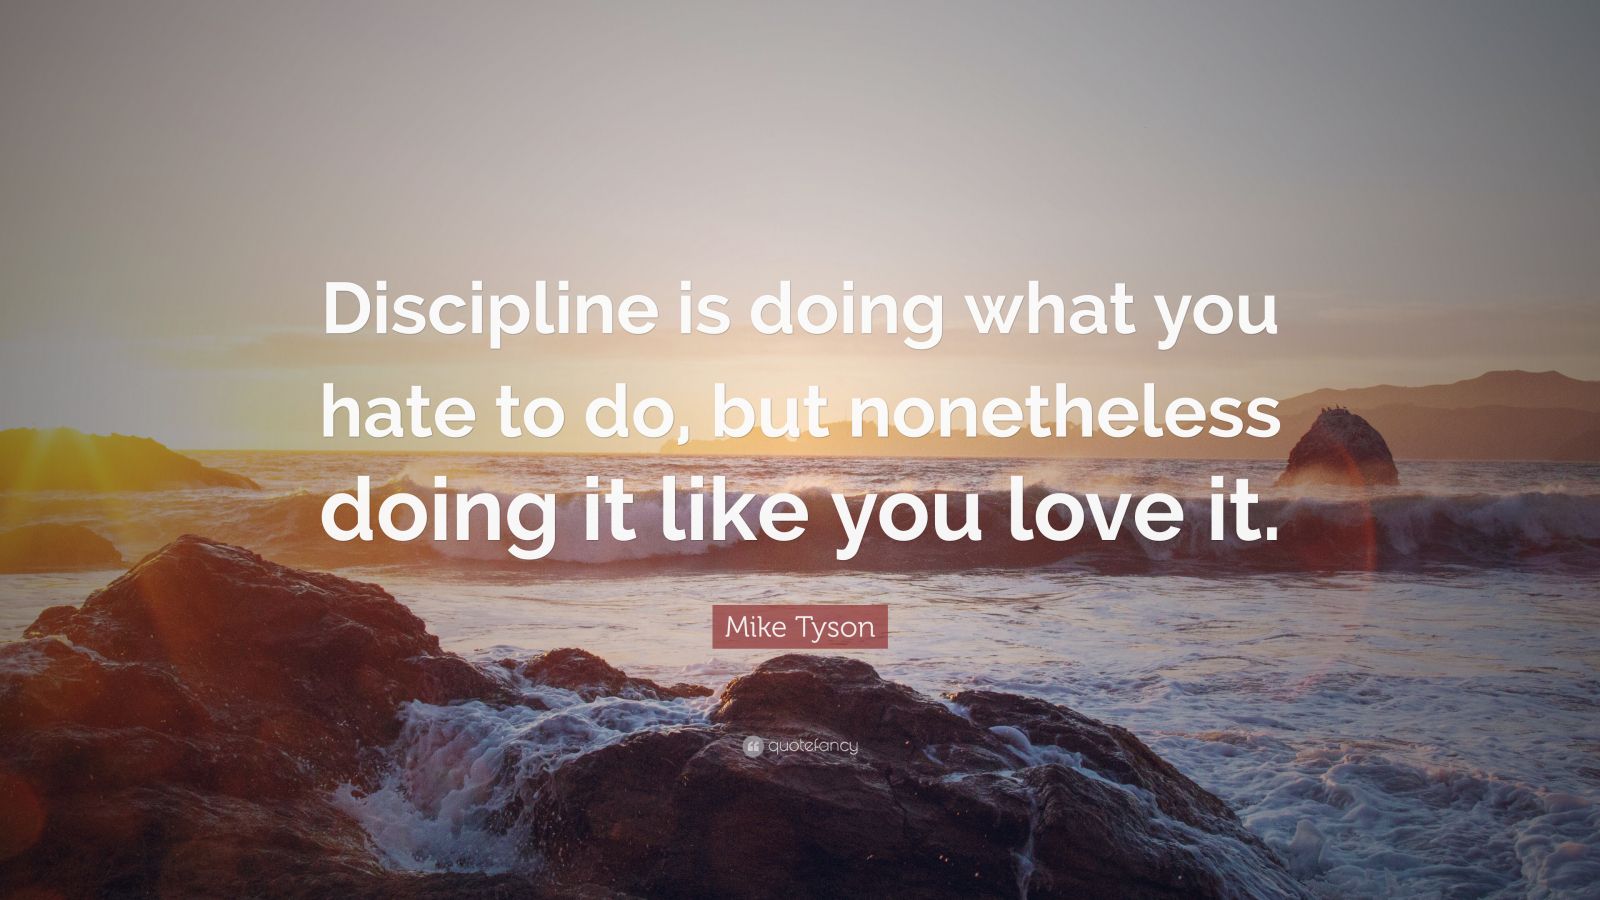 Mike Tyson Quote: “Discipline is doing what you hate to do, but